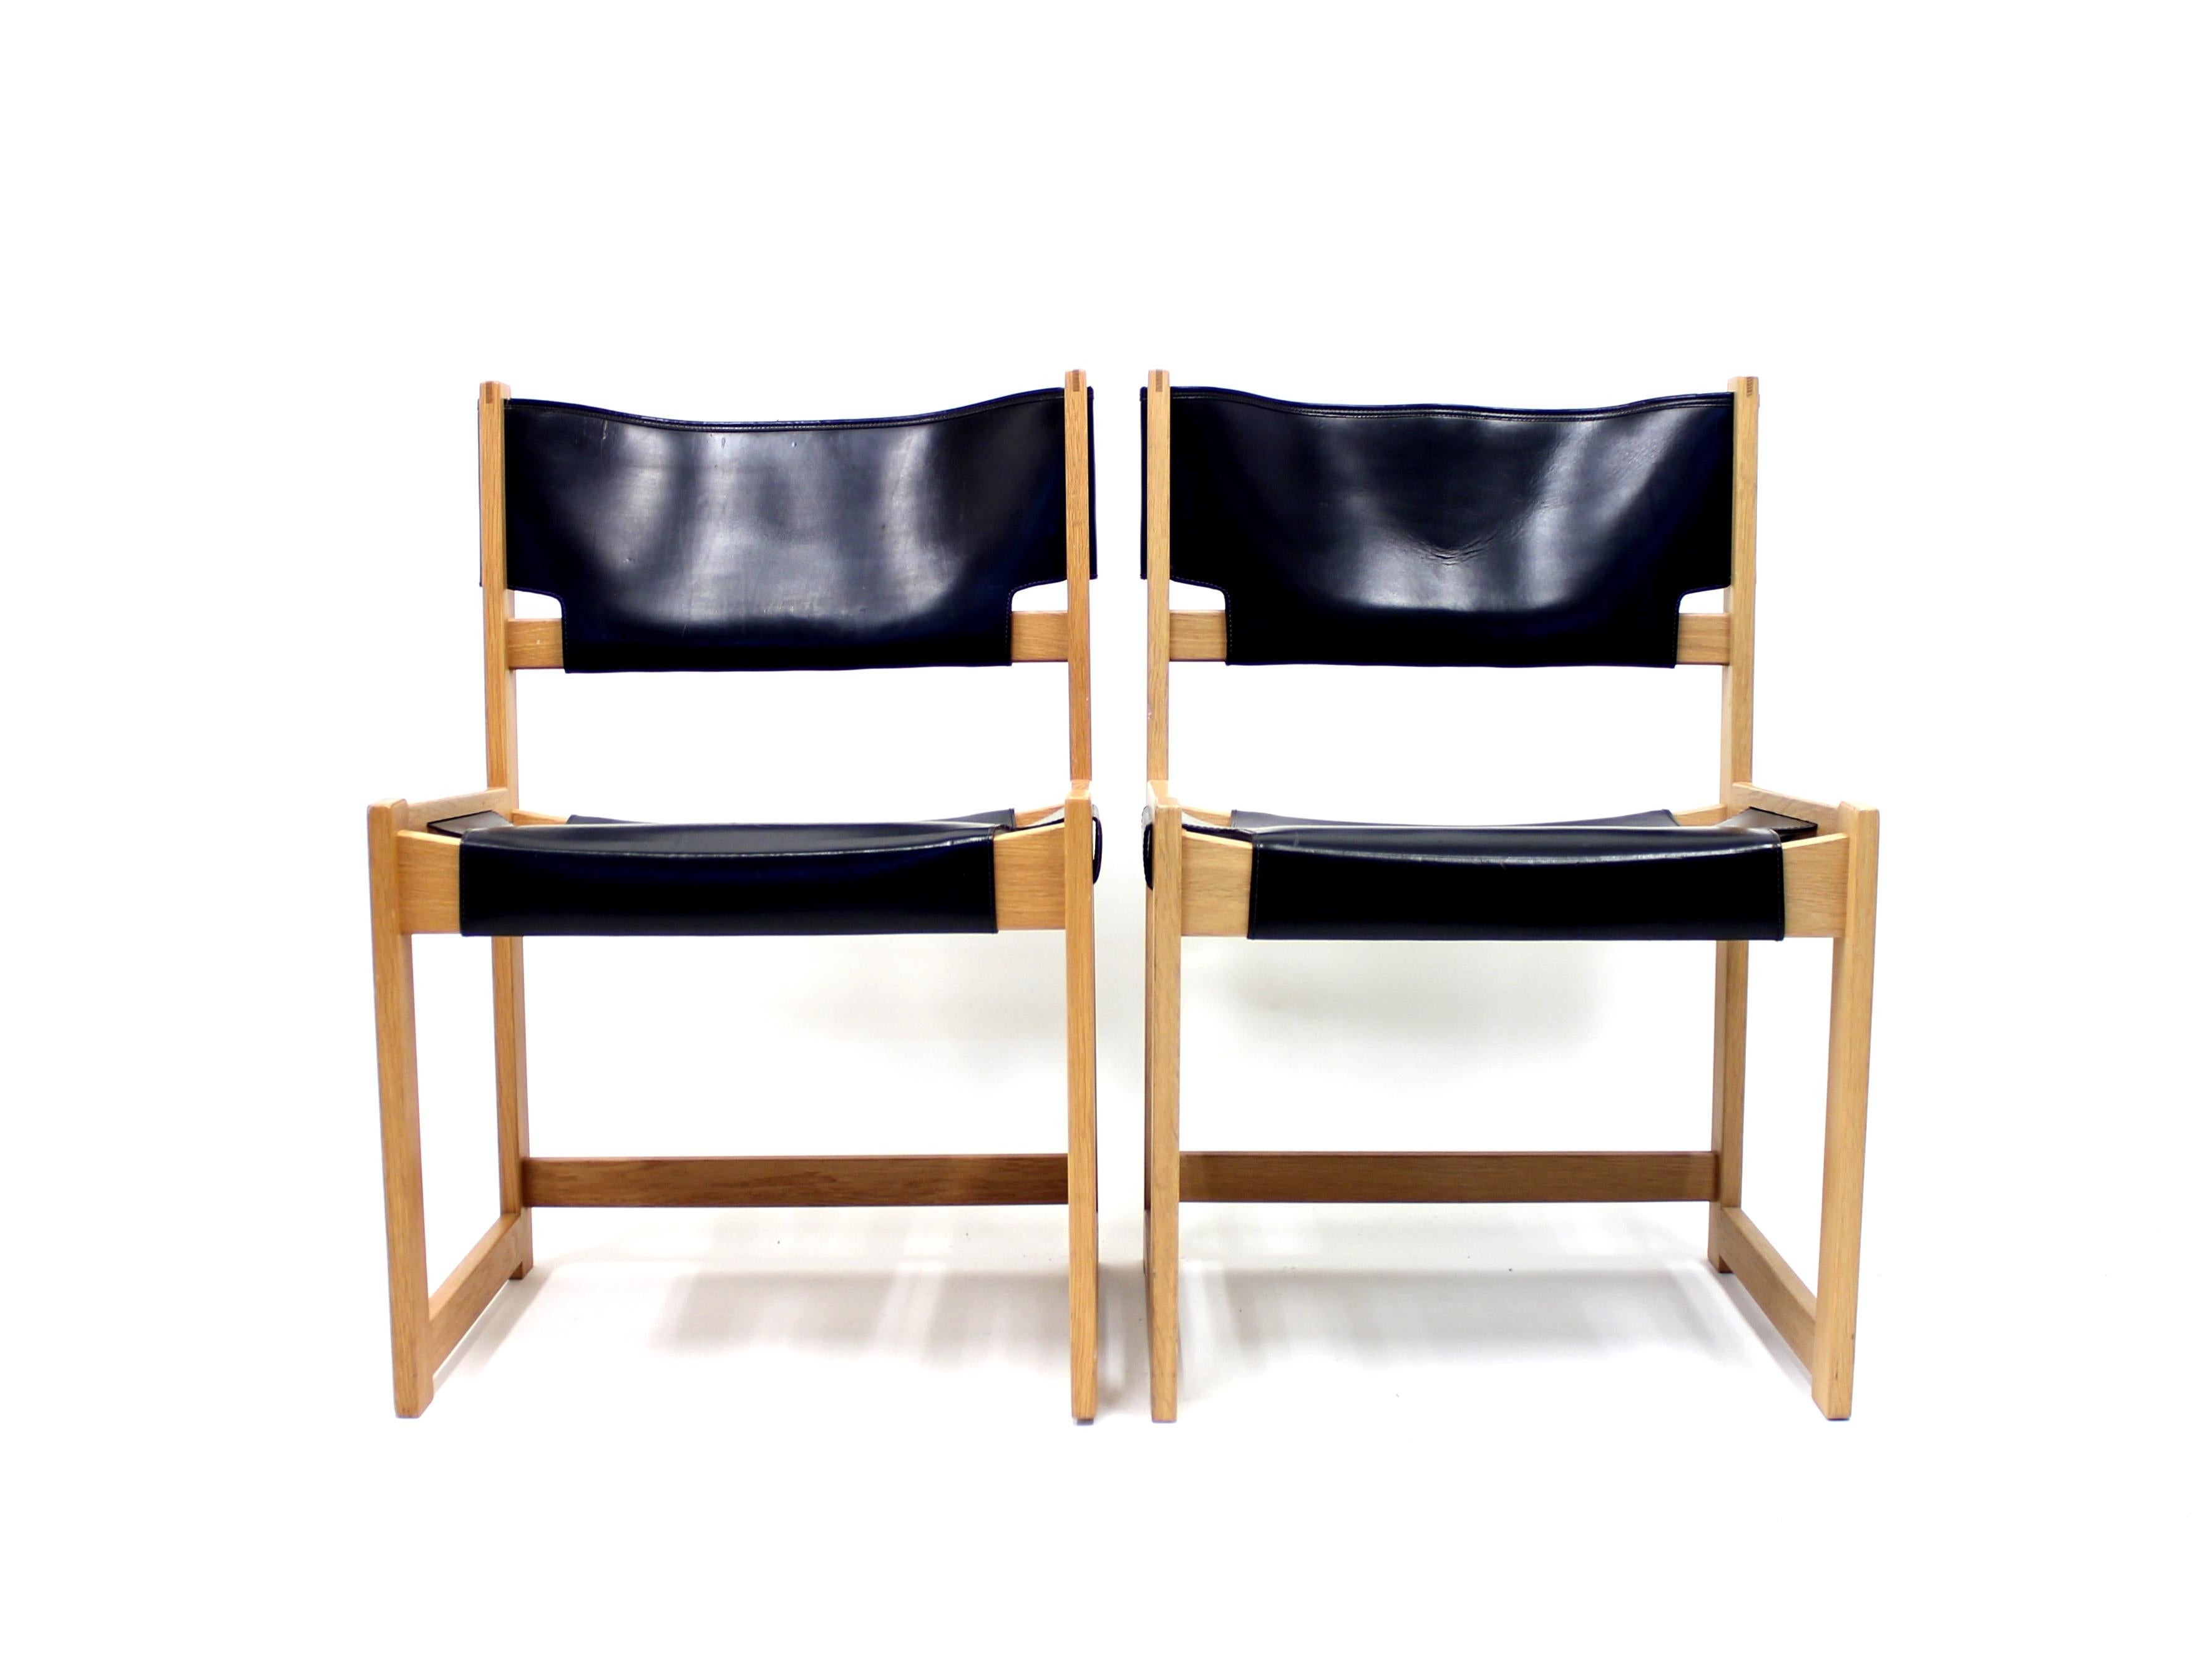 Armchair designed by Sven Kai Larsen for Swedish manufacturer Nordiska Kompaniet in the 1960s. It´s made of solid pine and black leather. Good vintage condition with some patina on the leather.